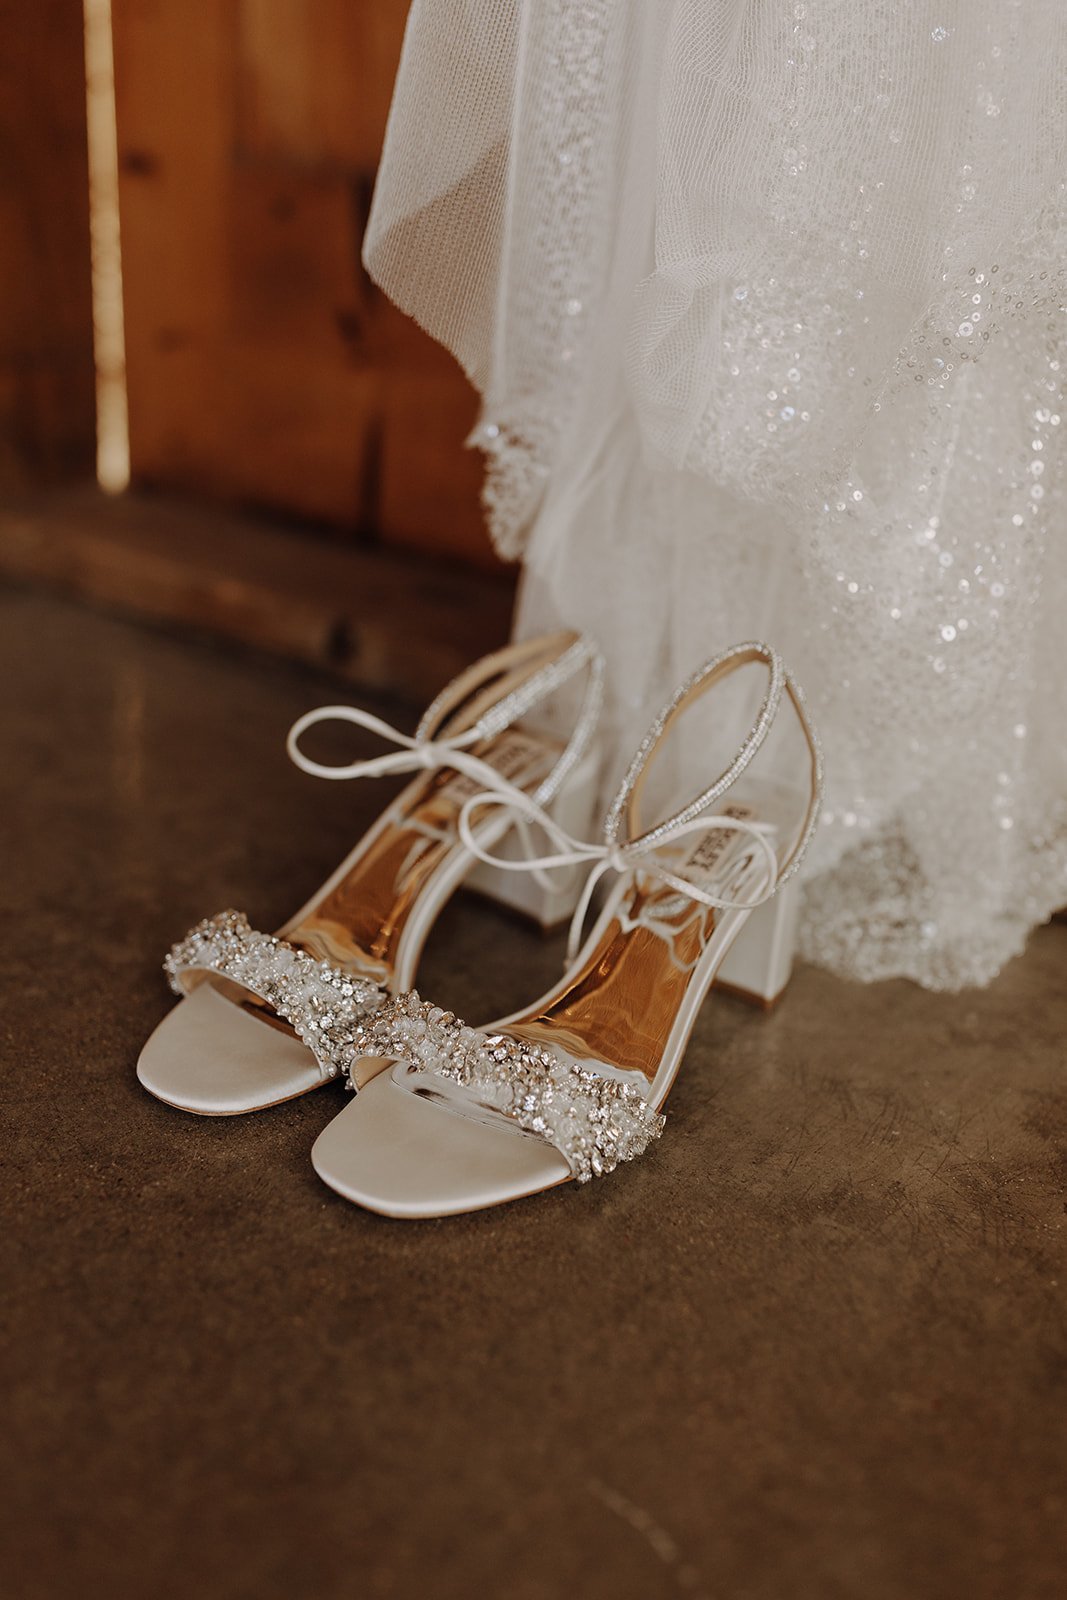 Sparkly white wedding dress by Made with Love with matching sandals